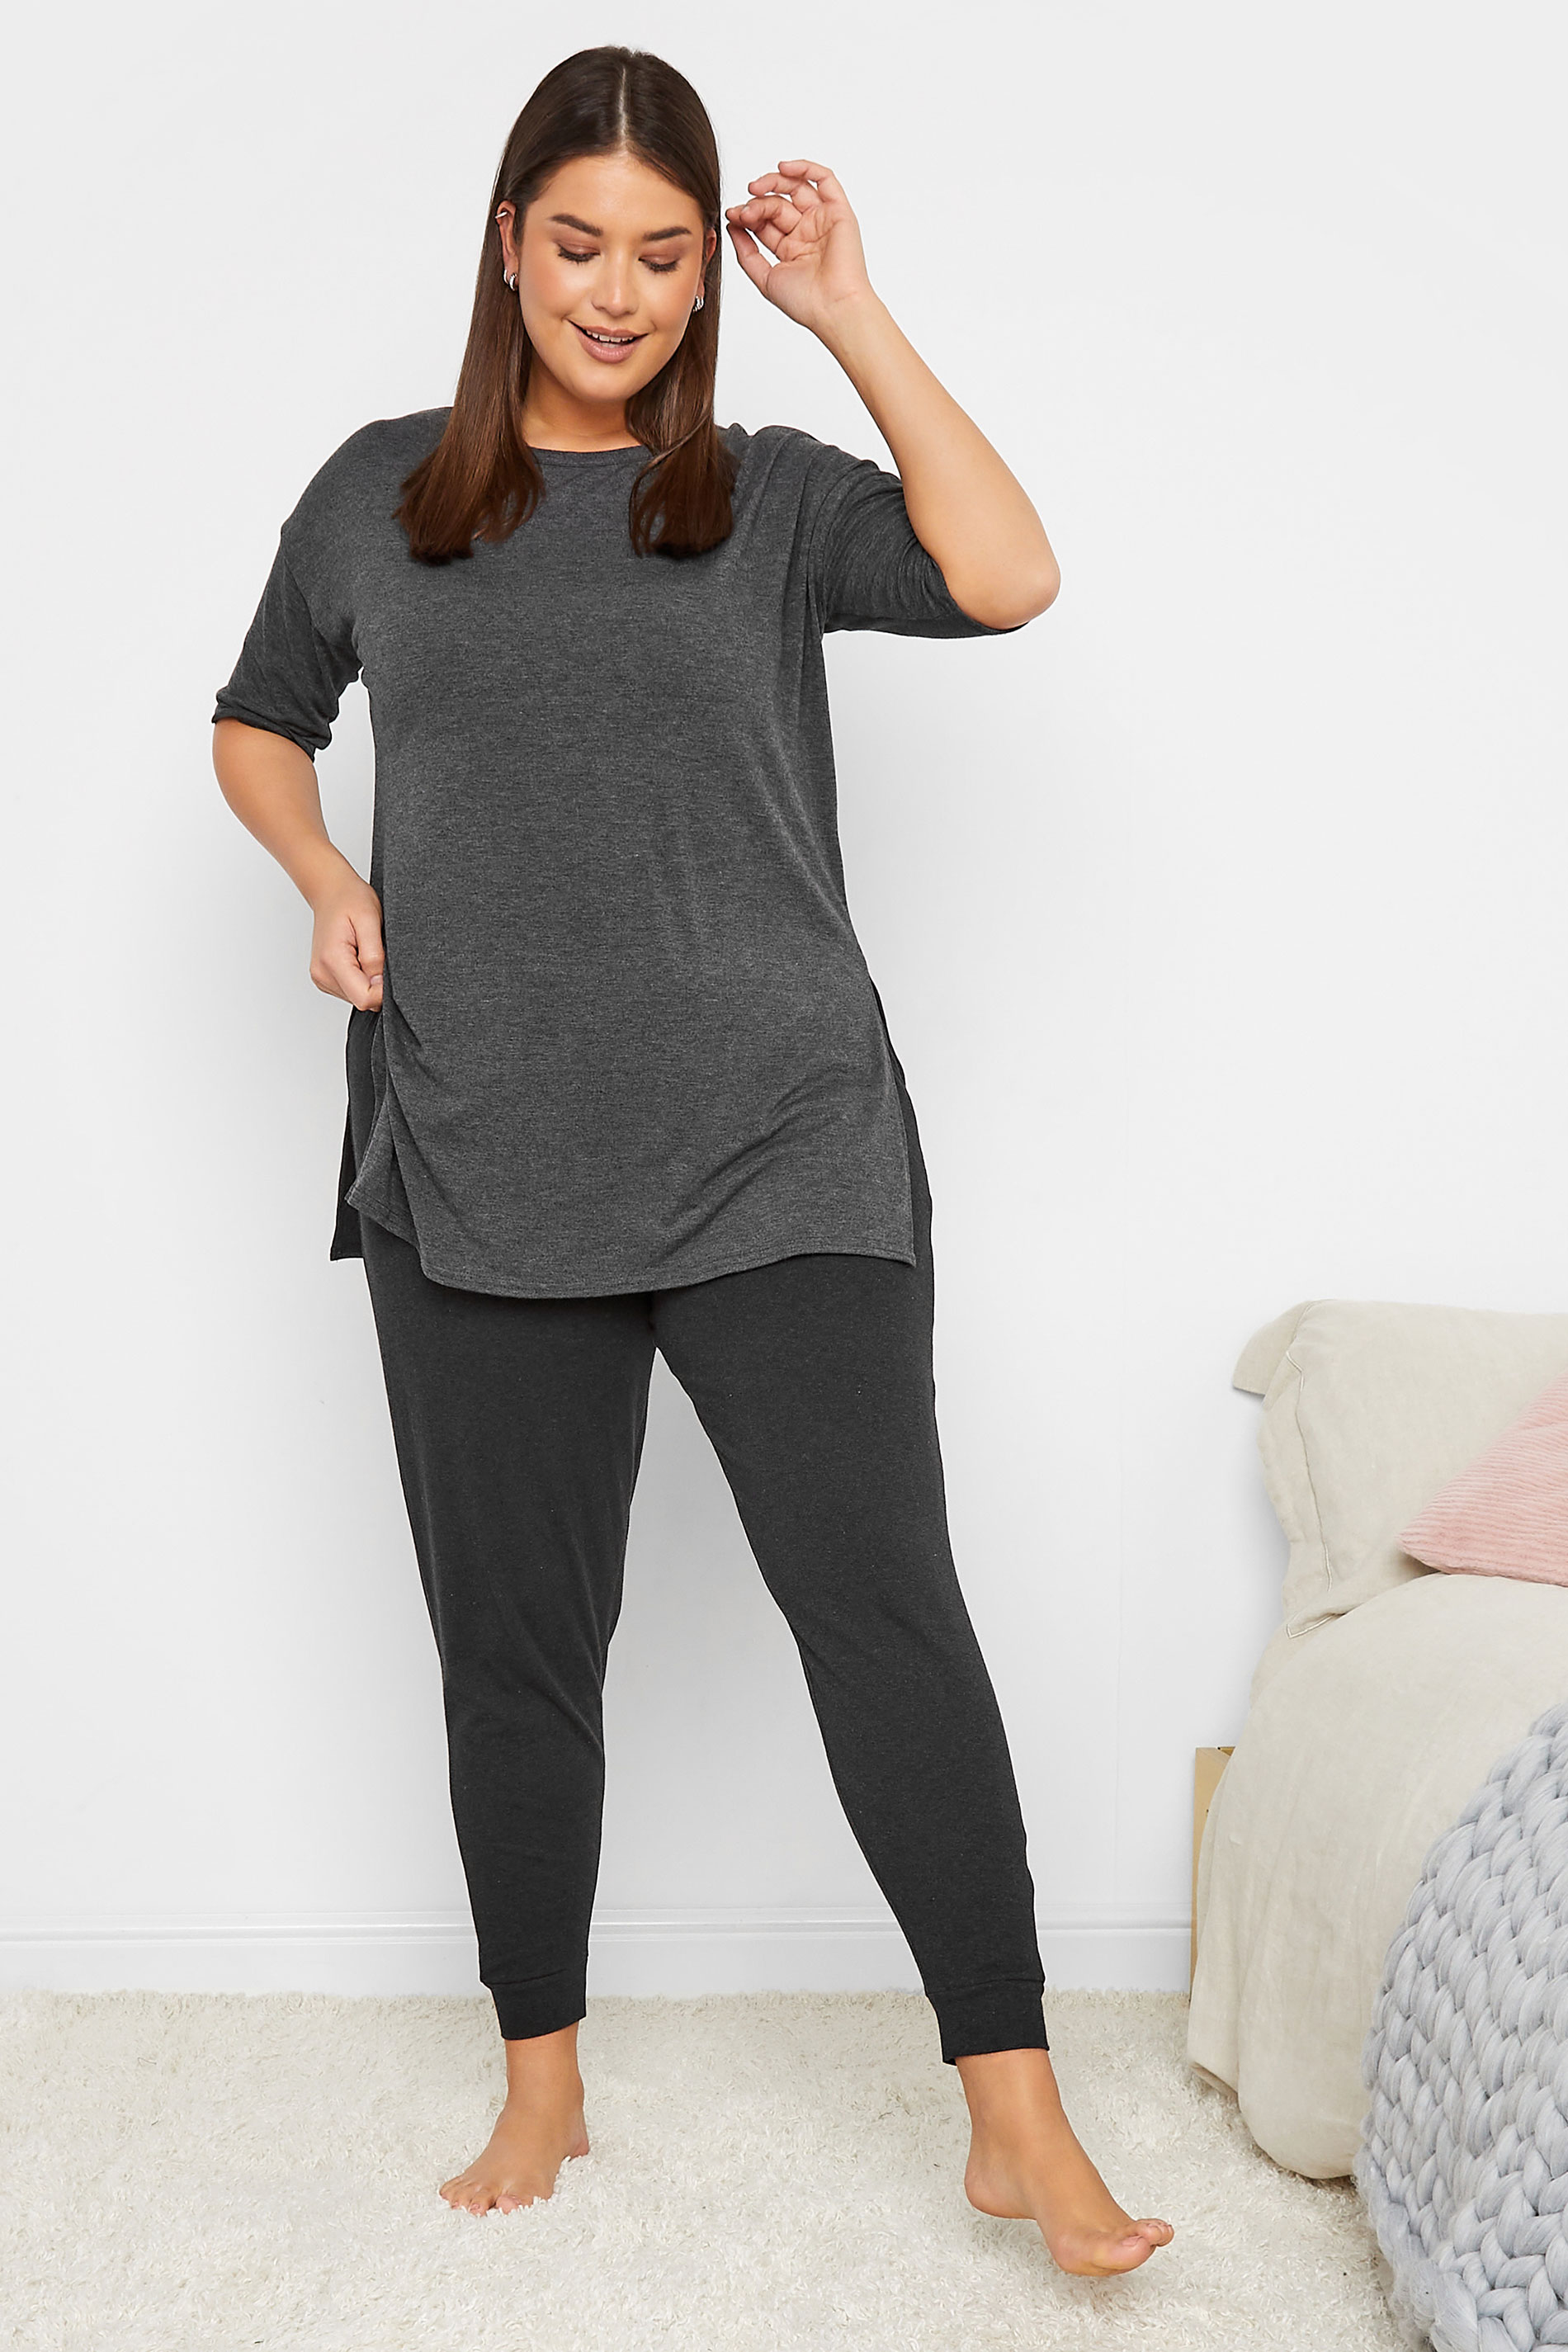 2 PACK Plus Size Black Cuffed Pyjama Bottoms | Yours Clothing 3